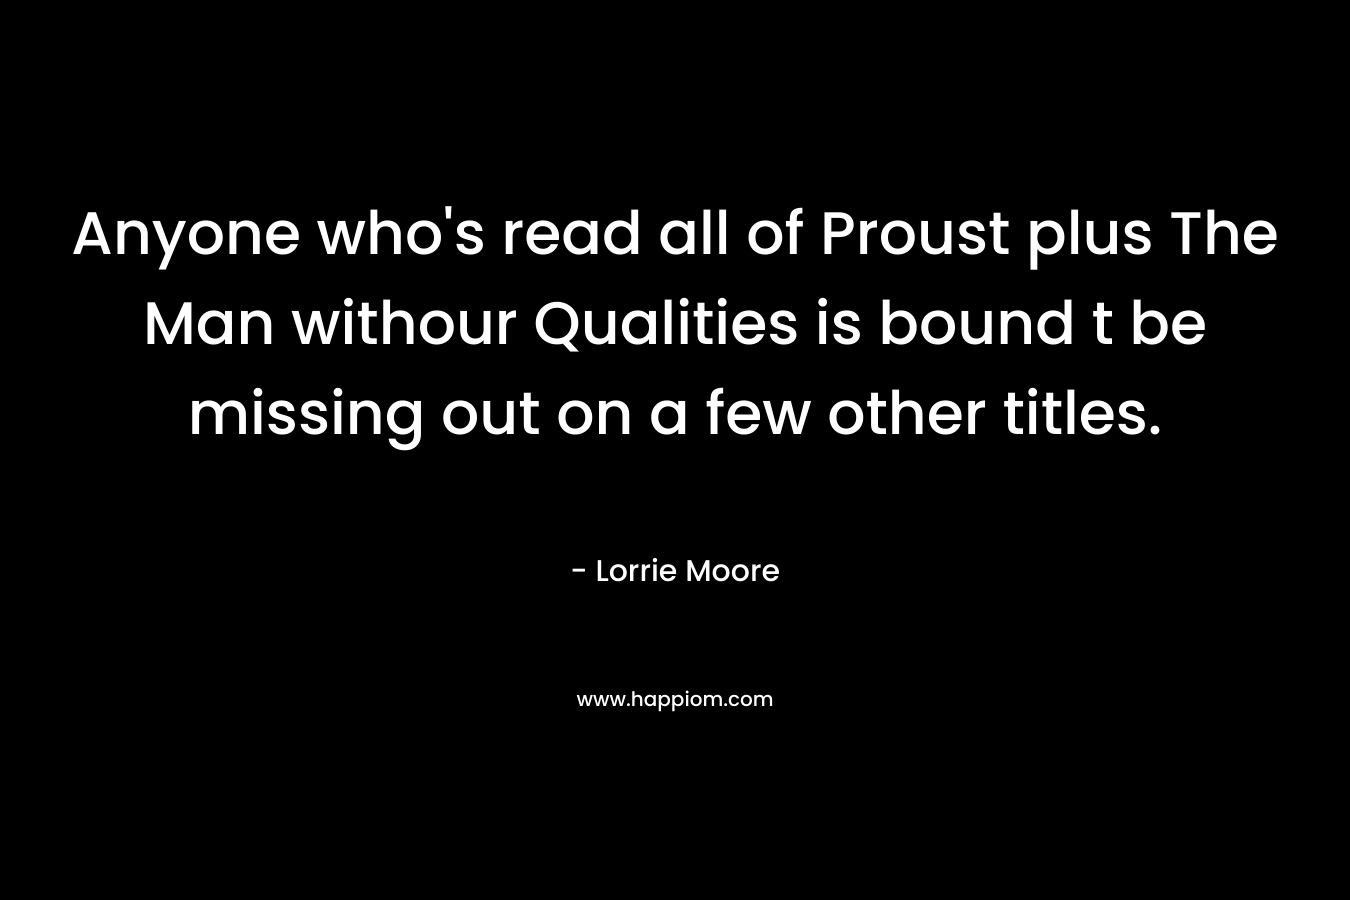 Anyone who's read all of Proust plus The Man withour Qualities is bound t be missing out on a few other titles.